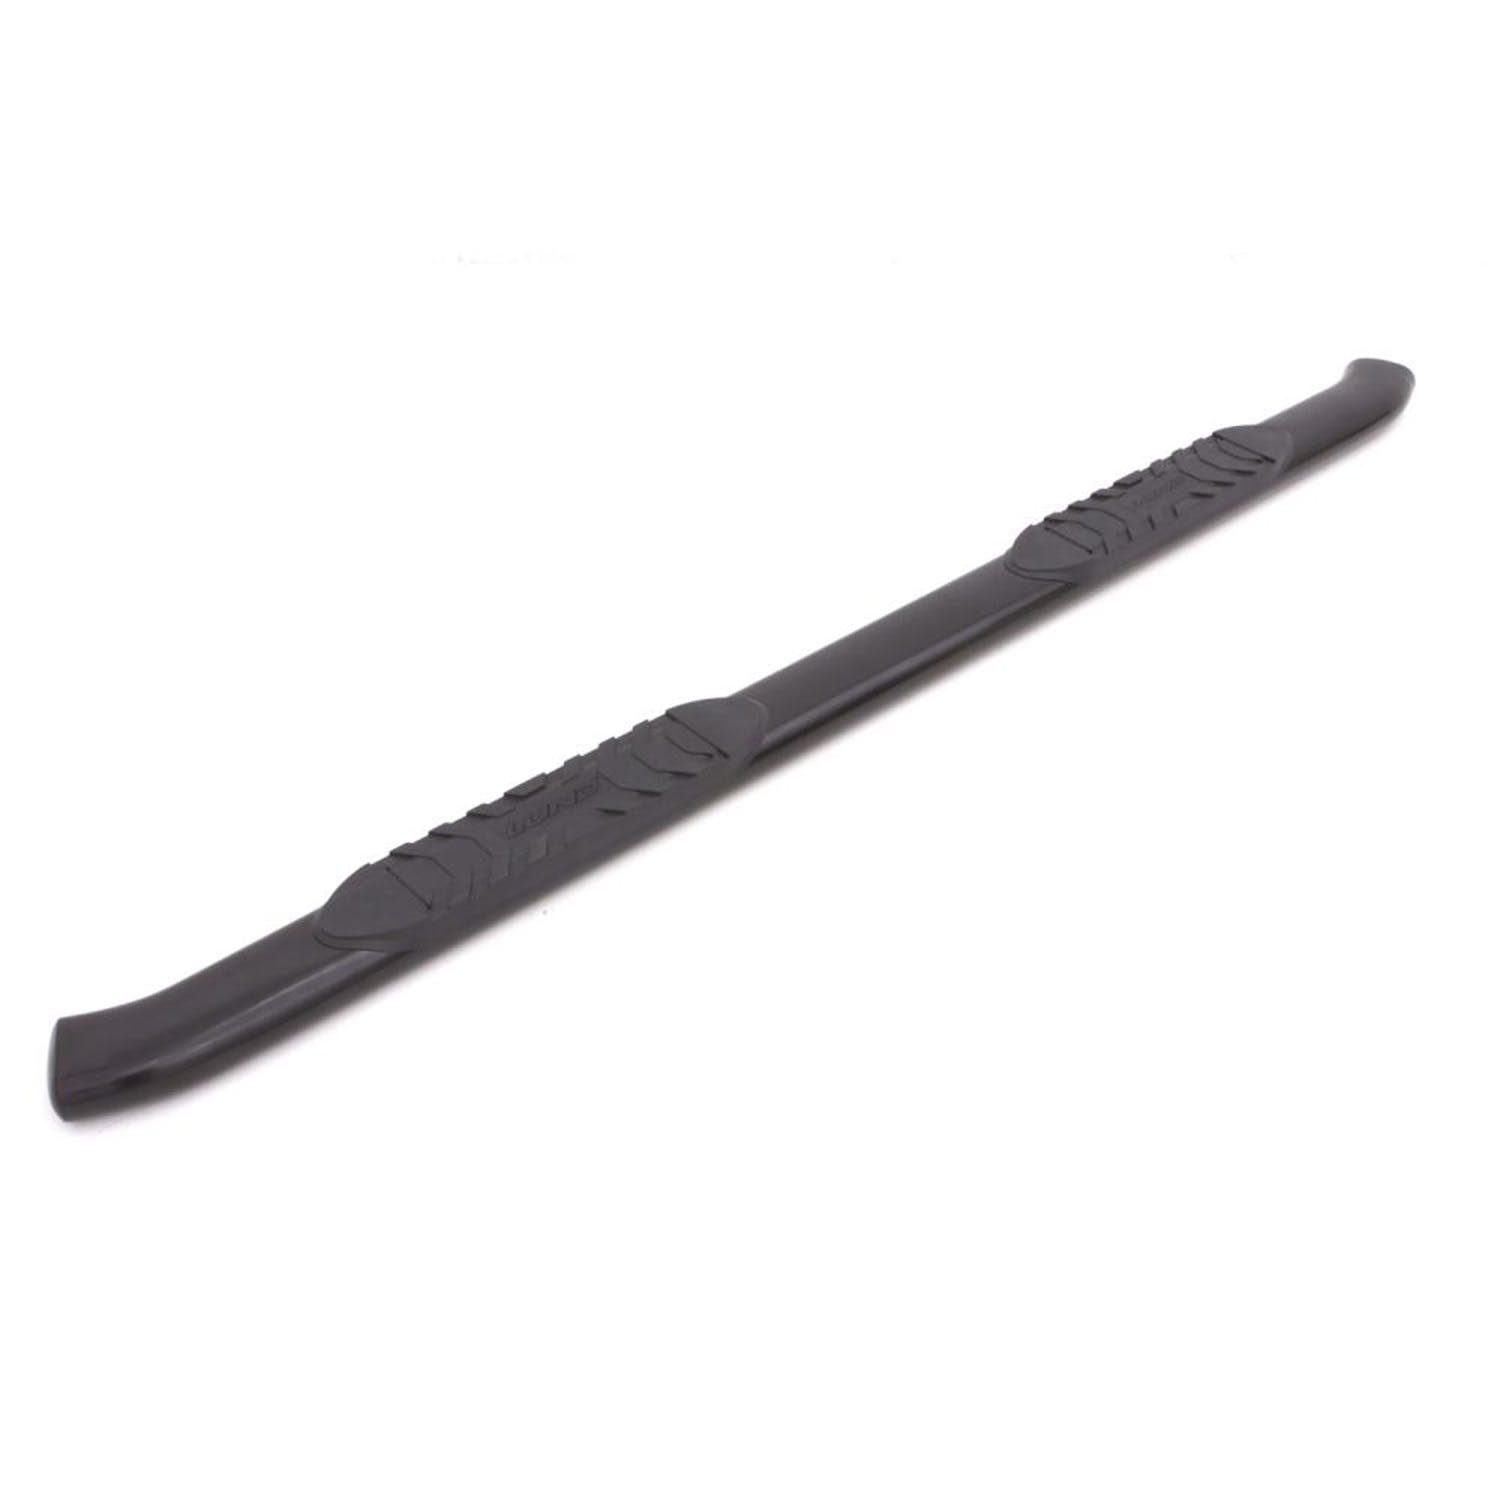 LUND 24279079 5 Inch Oval Curved Nerf Bar - Black LUND -5 inch CURVED OVAL BLACK SS